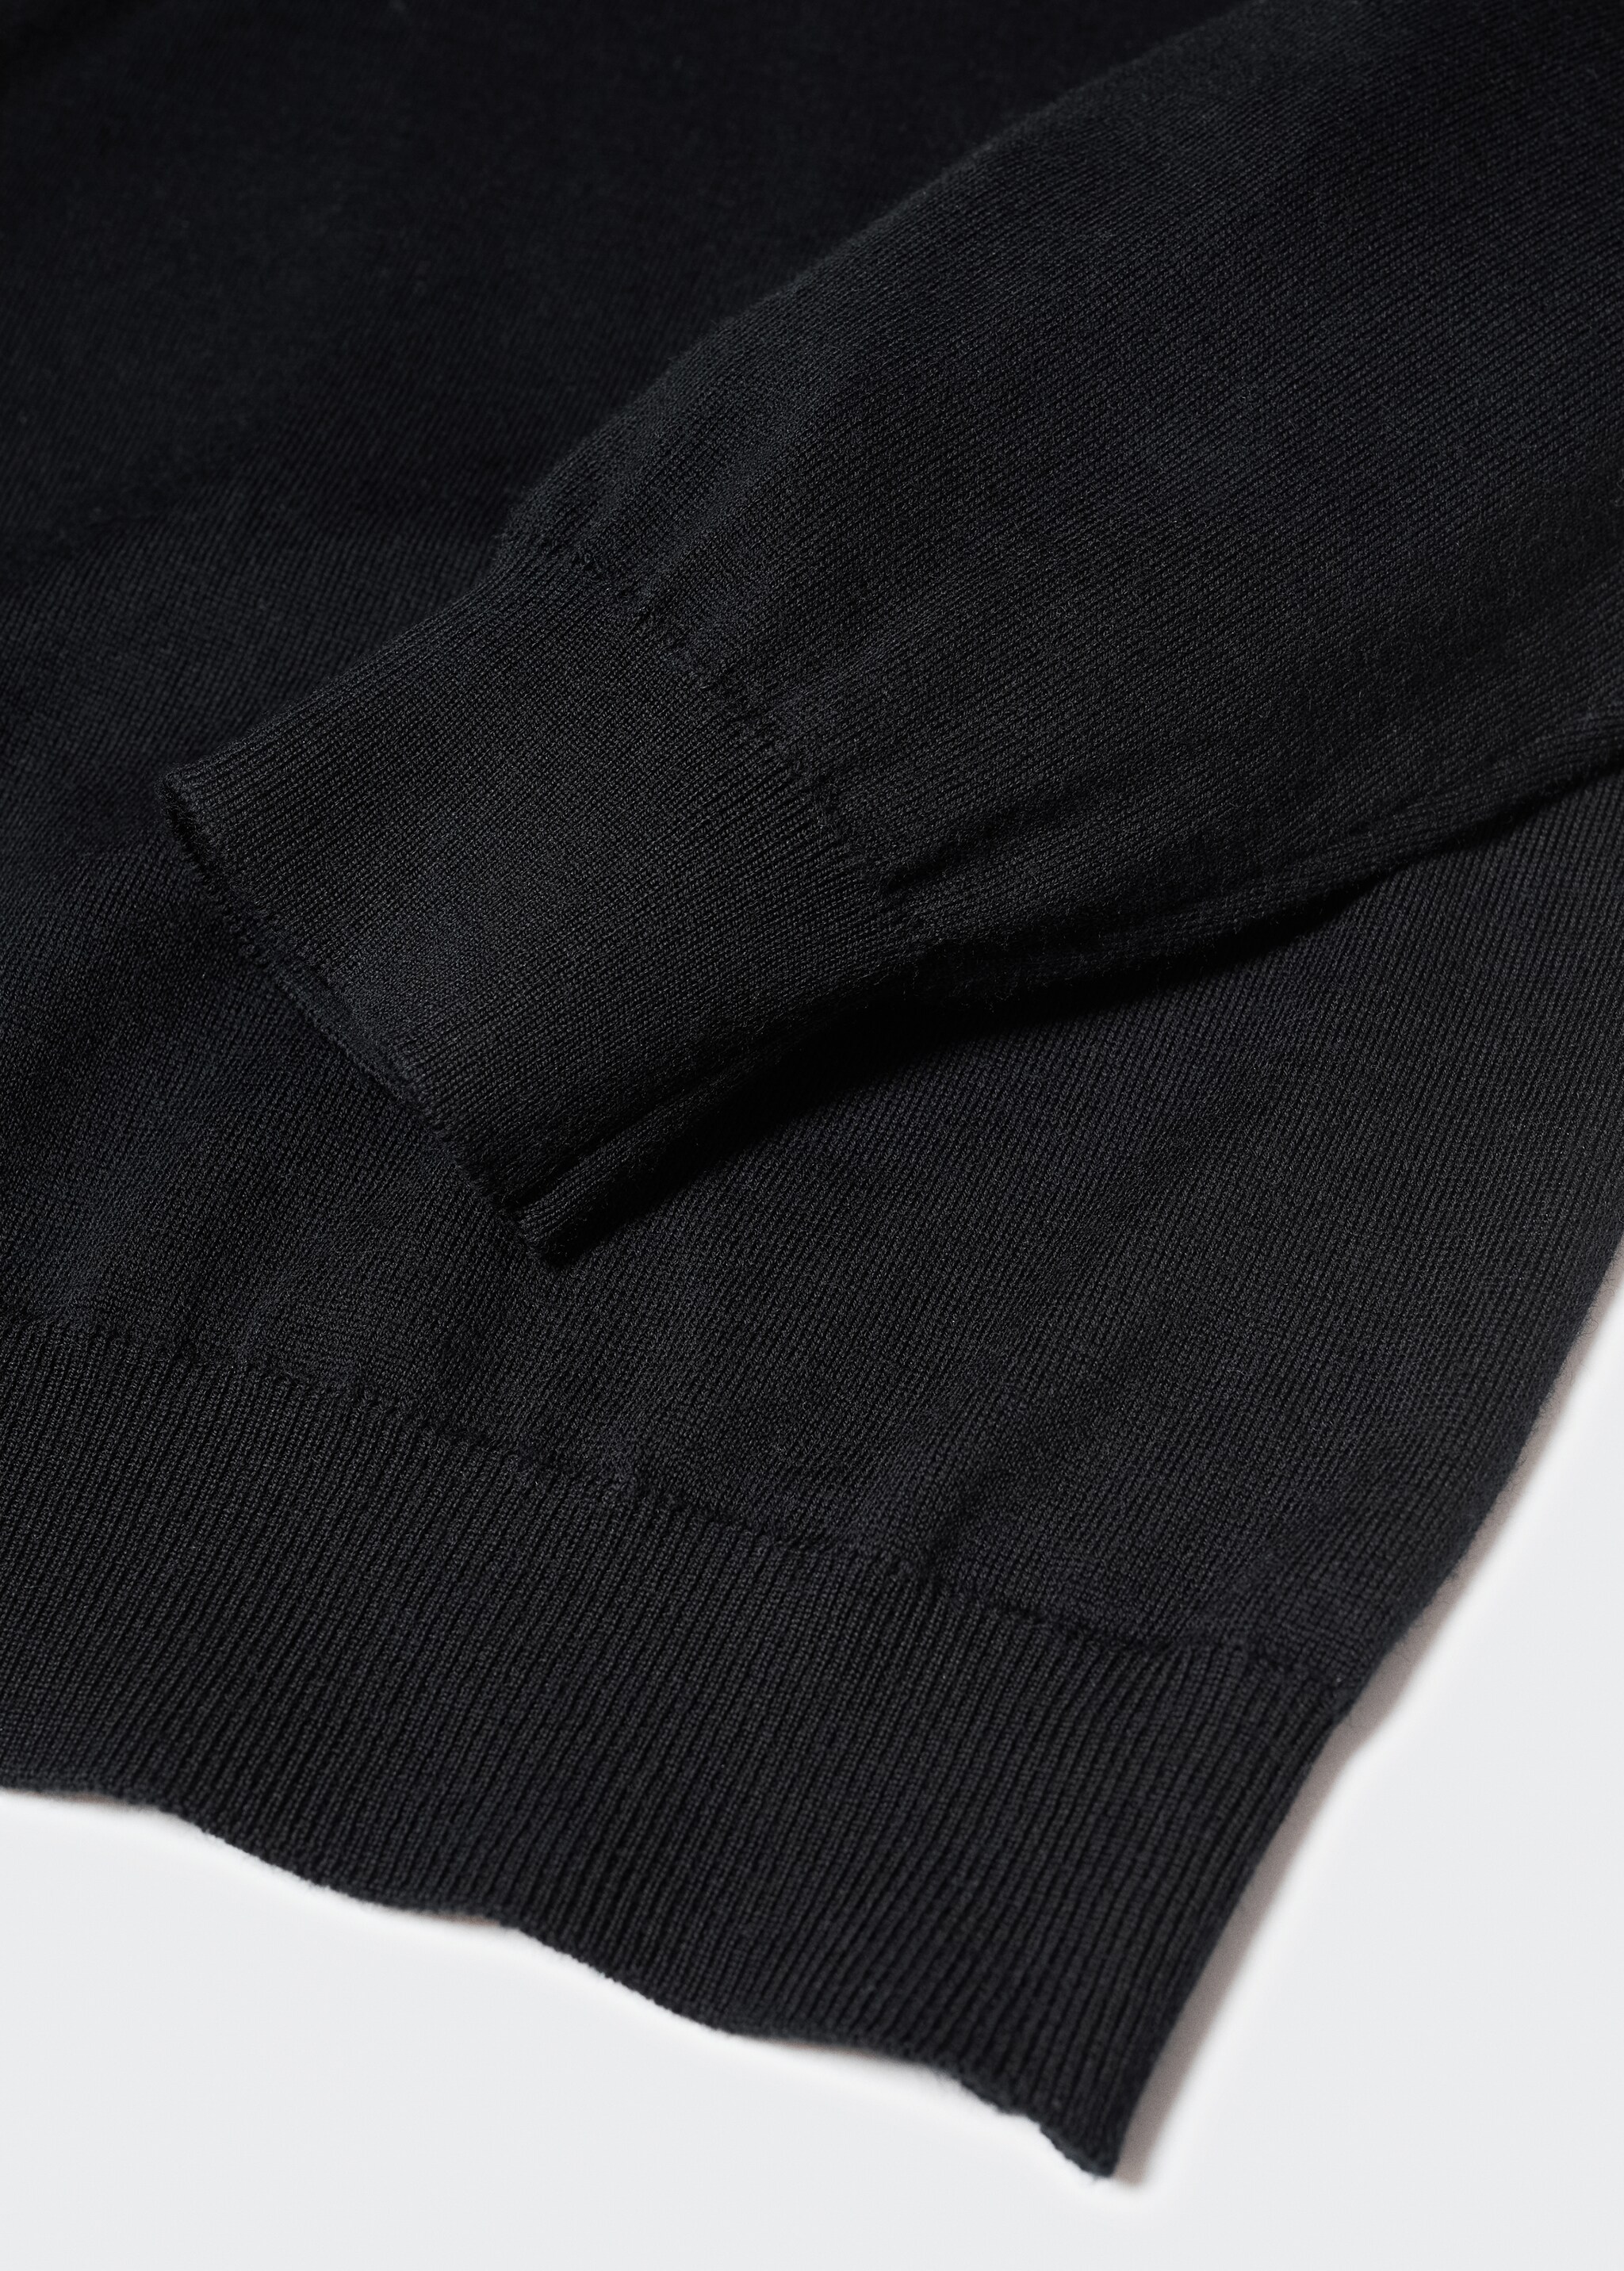 100% merino wool sweater - Details of the article 8